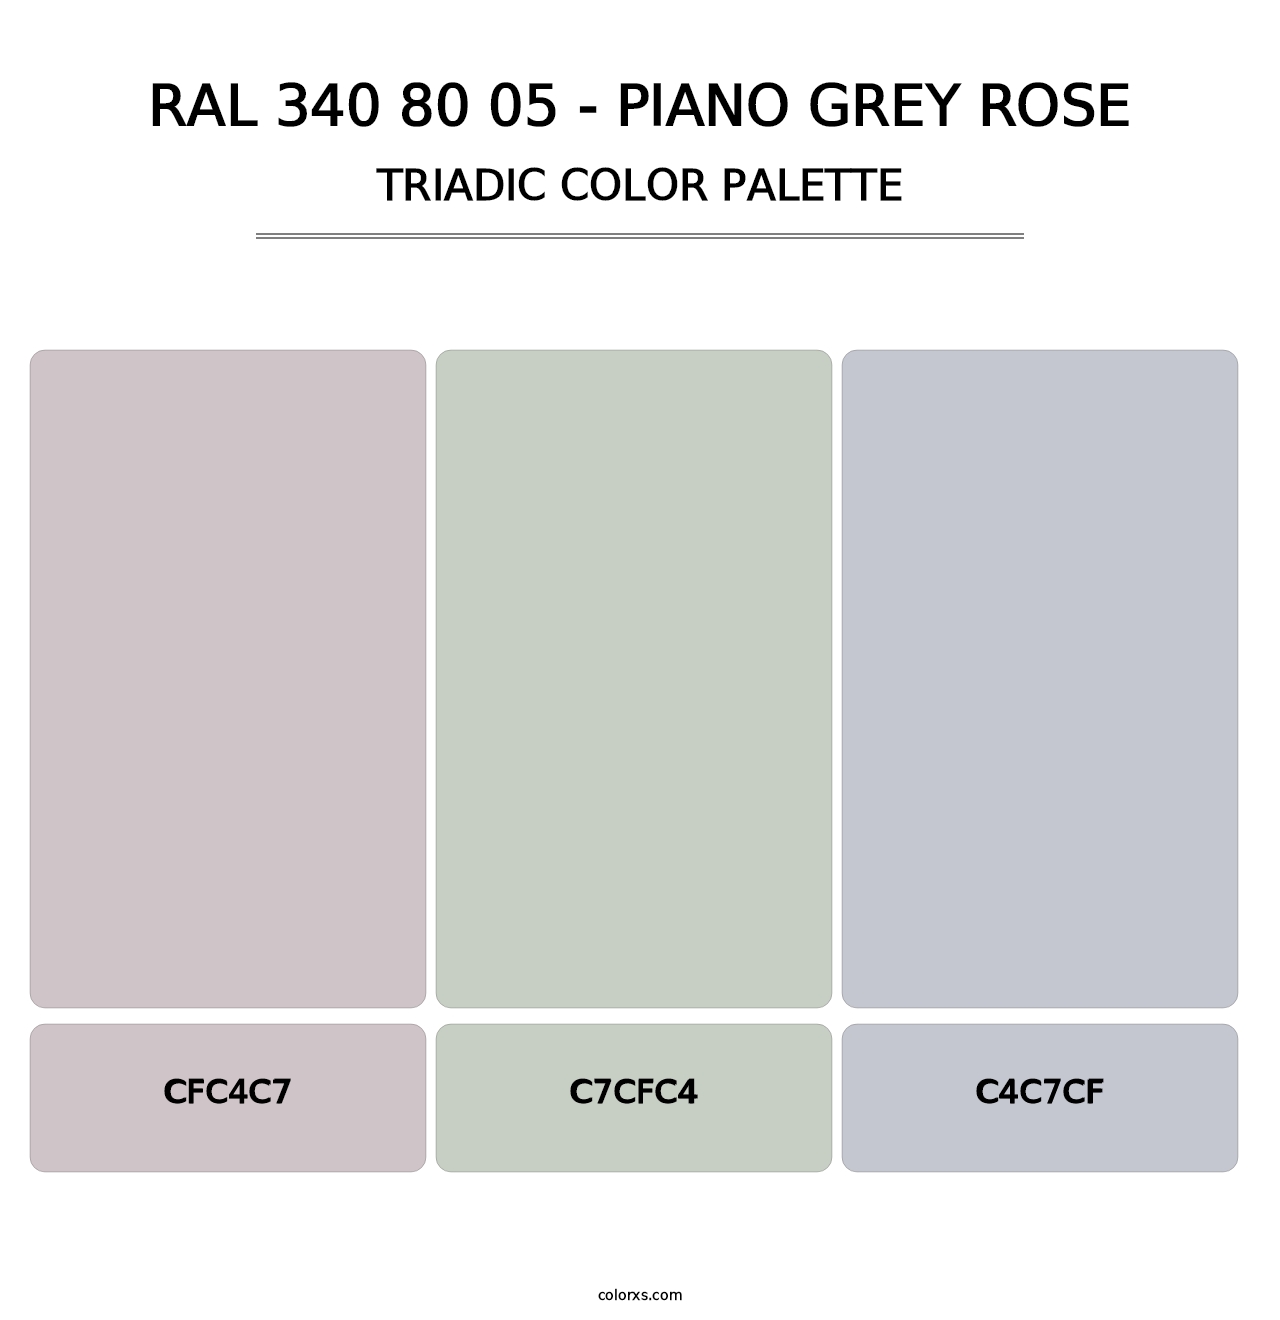 RAL 340 80 05 - Piano Grey Rose - Triadic Color Palette